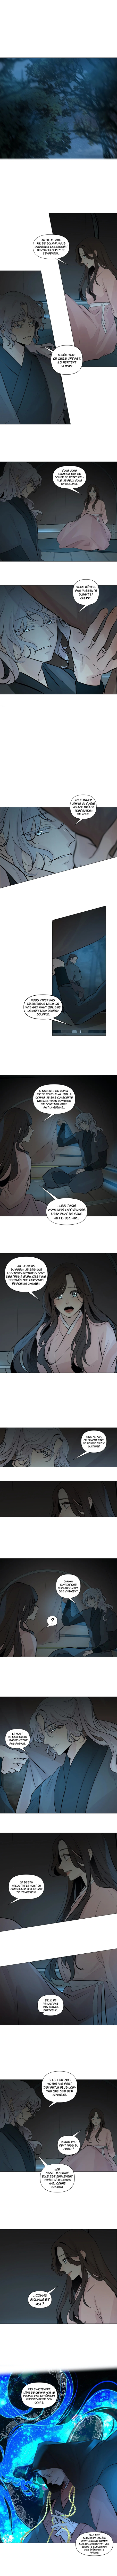 Ellin's Solhwa: Chapter 43 - Page 1